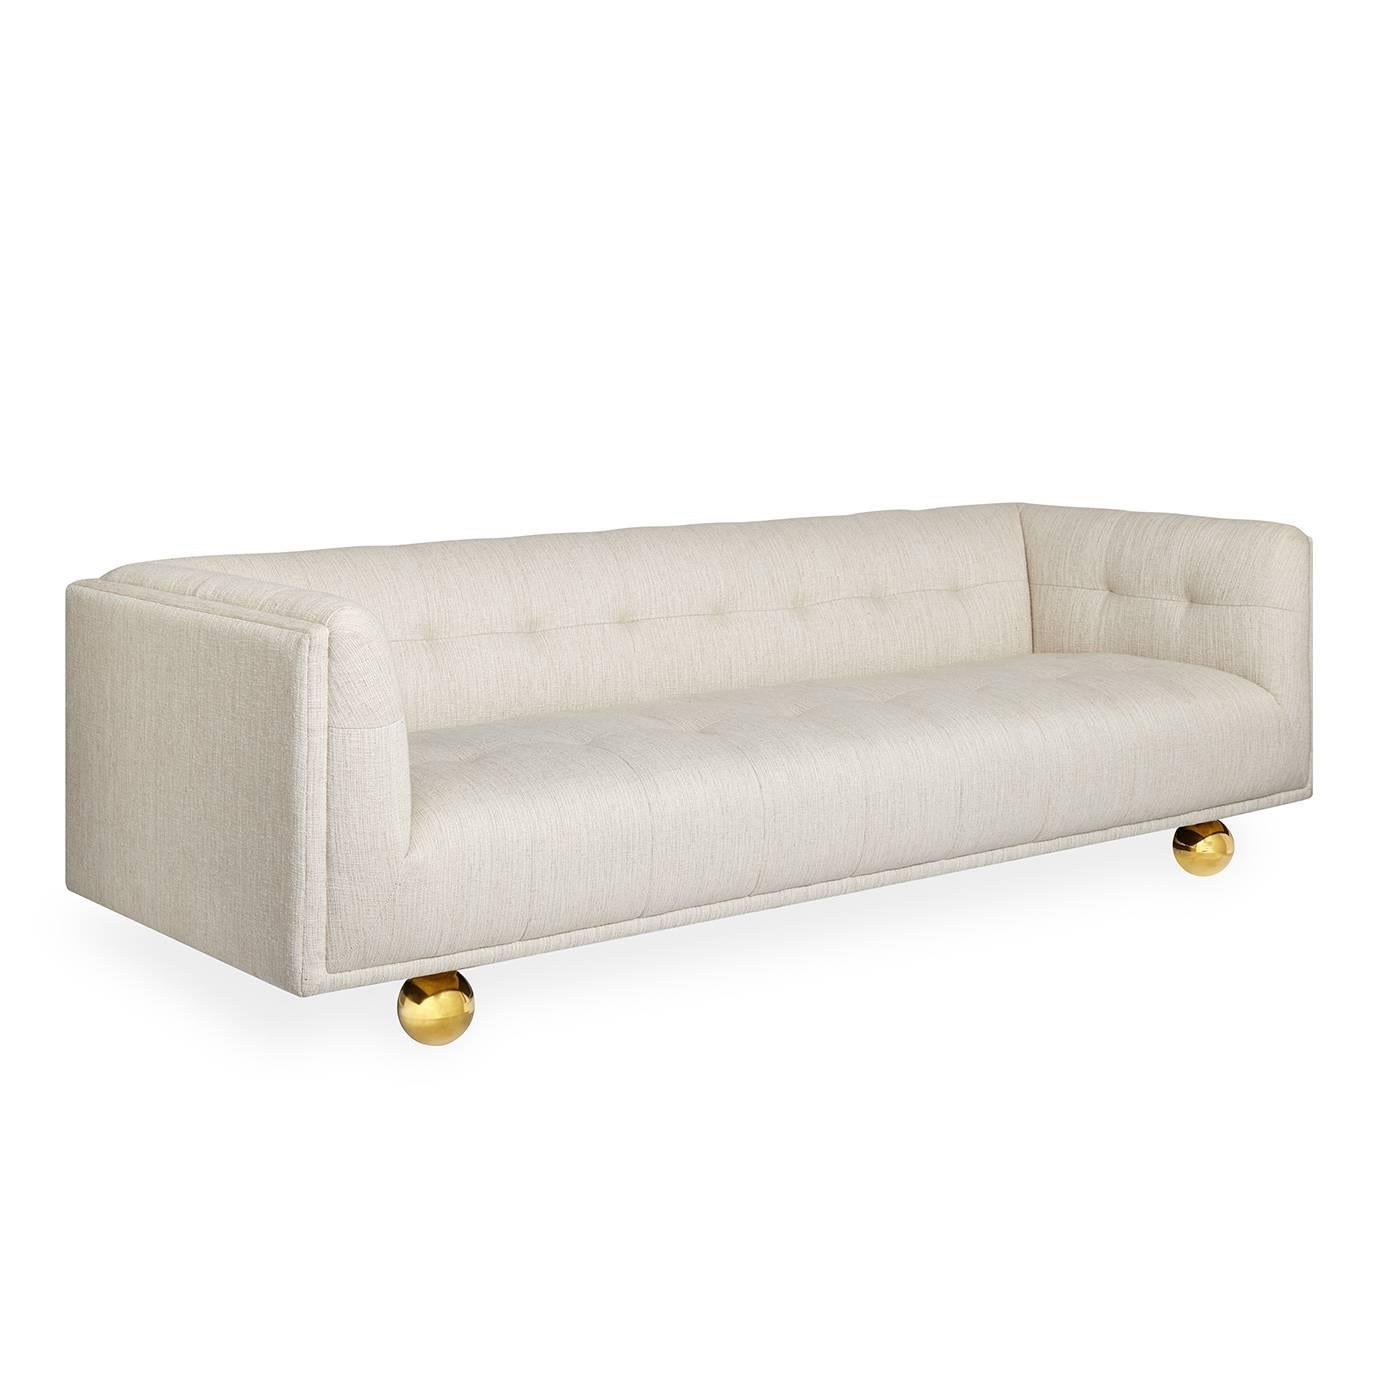 The Chesterfield sofa gets a Modern American Glamour update. We took the guts of a Chesterfield (clubby comfort and tailored tufting) and encased them in a pared down Silhouette. The finishing touch: we perched the haute hybrid on oversized brass